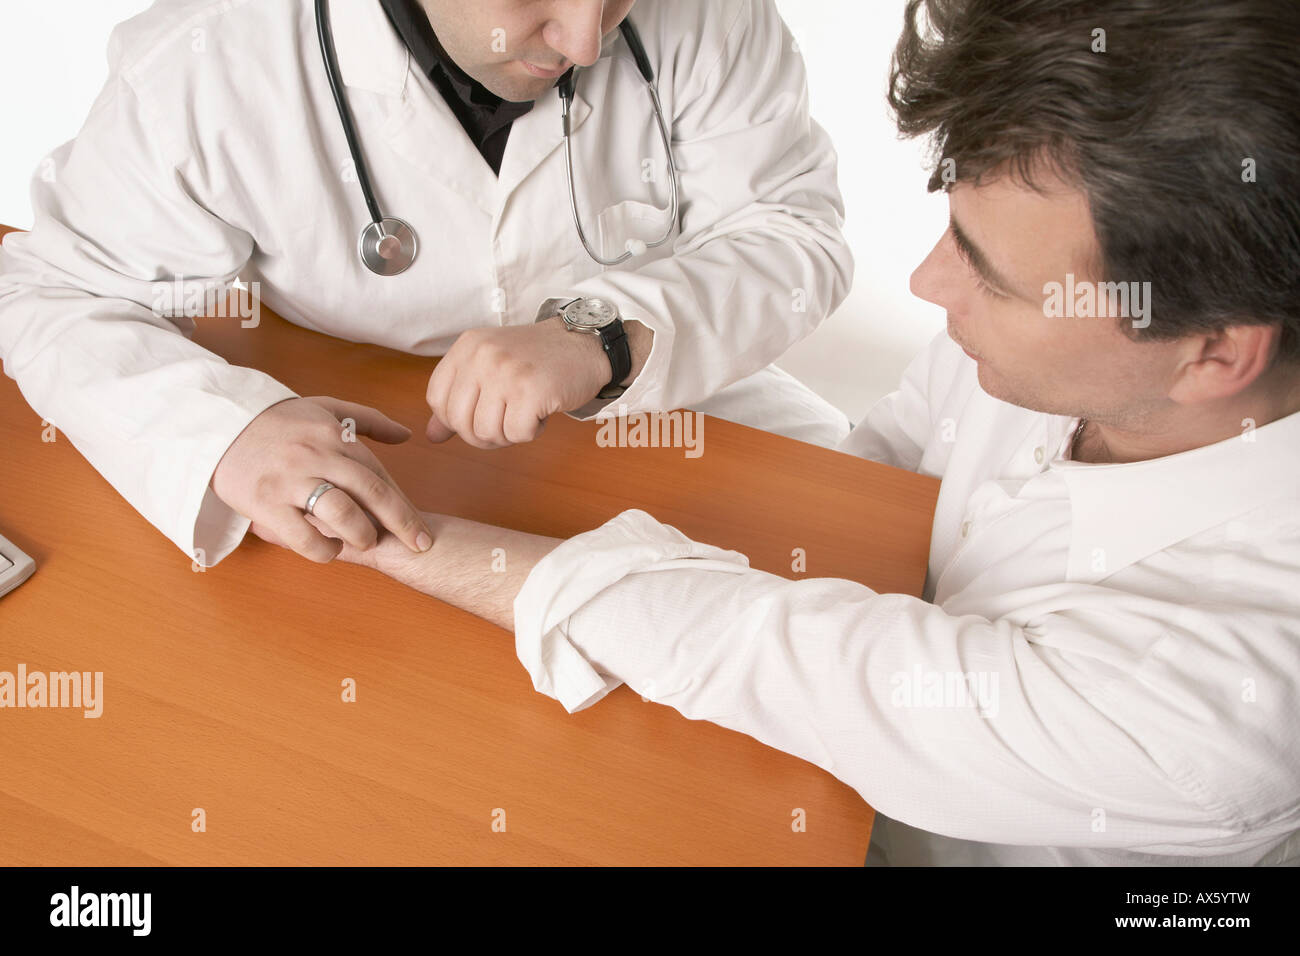 Physician with stethoscope checking patient's pulse Stock Photo